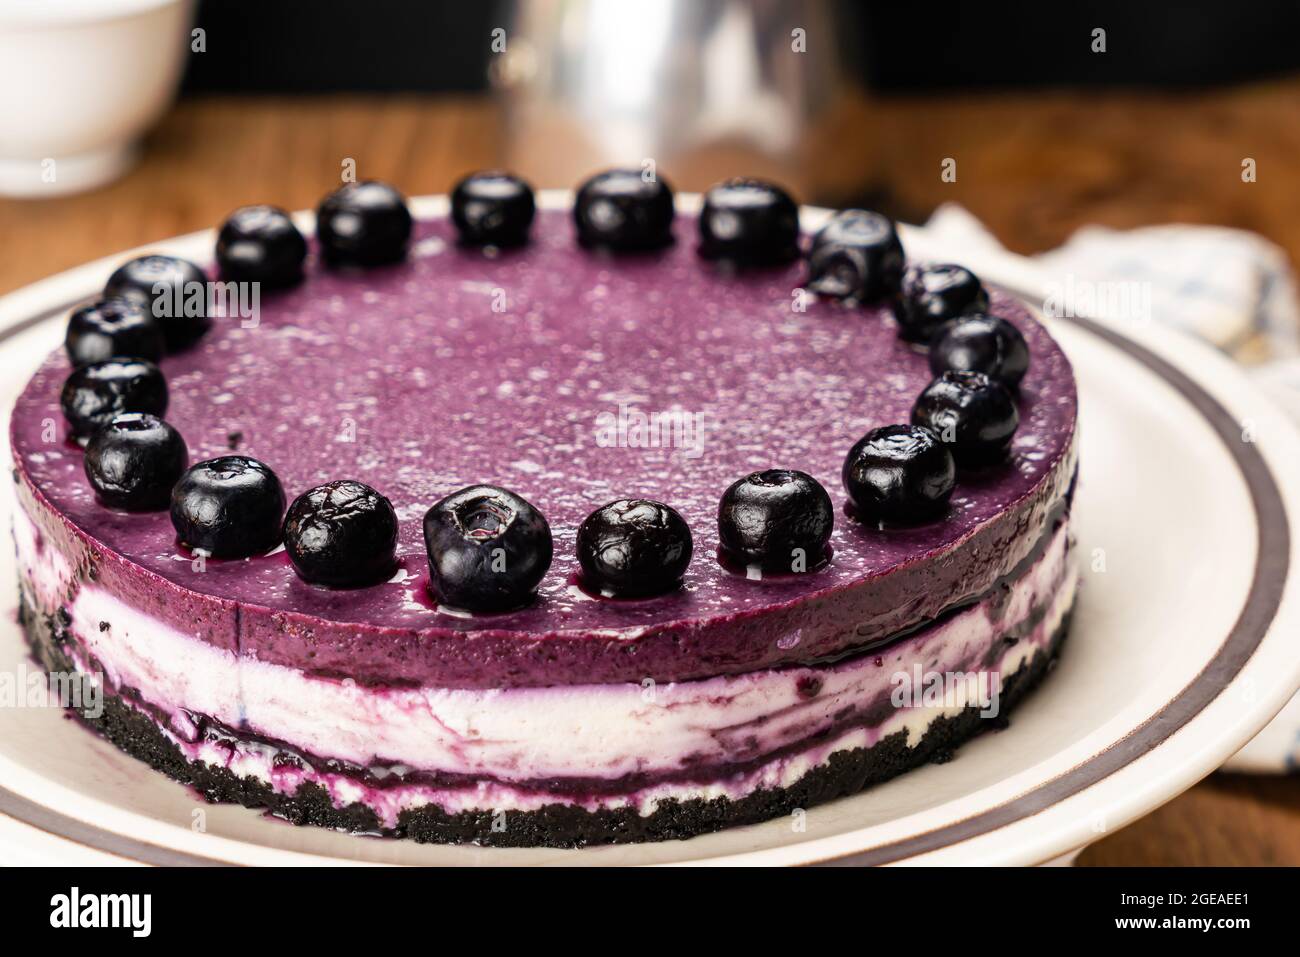 Closeup of delicious homemade blueberry cheesecake garnished with preserved blueberry in brown ceramic dish with table cloth, moka pot coffee maker, w Stock Photo